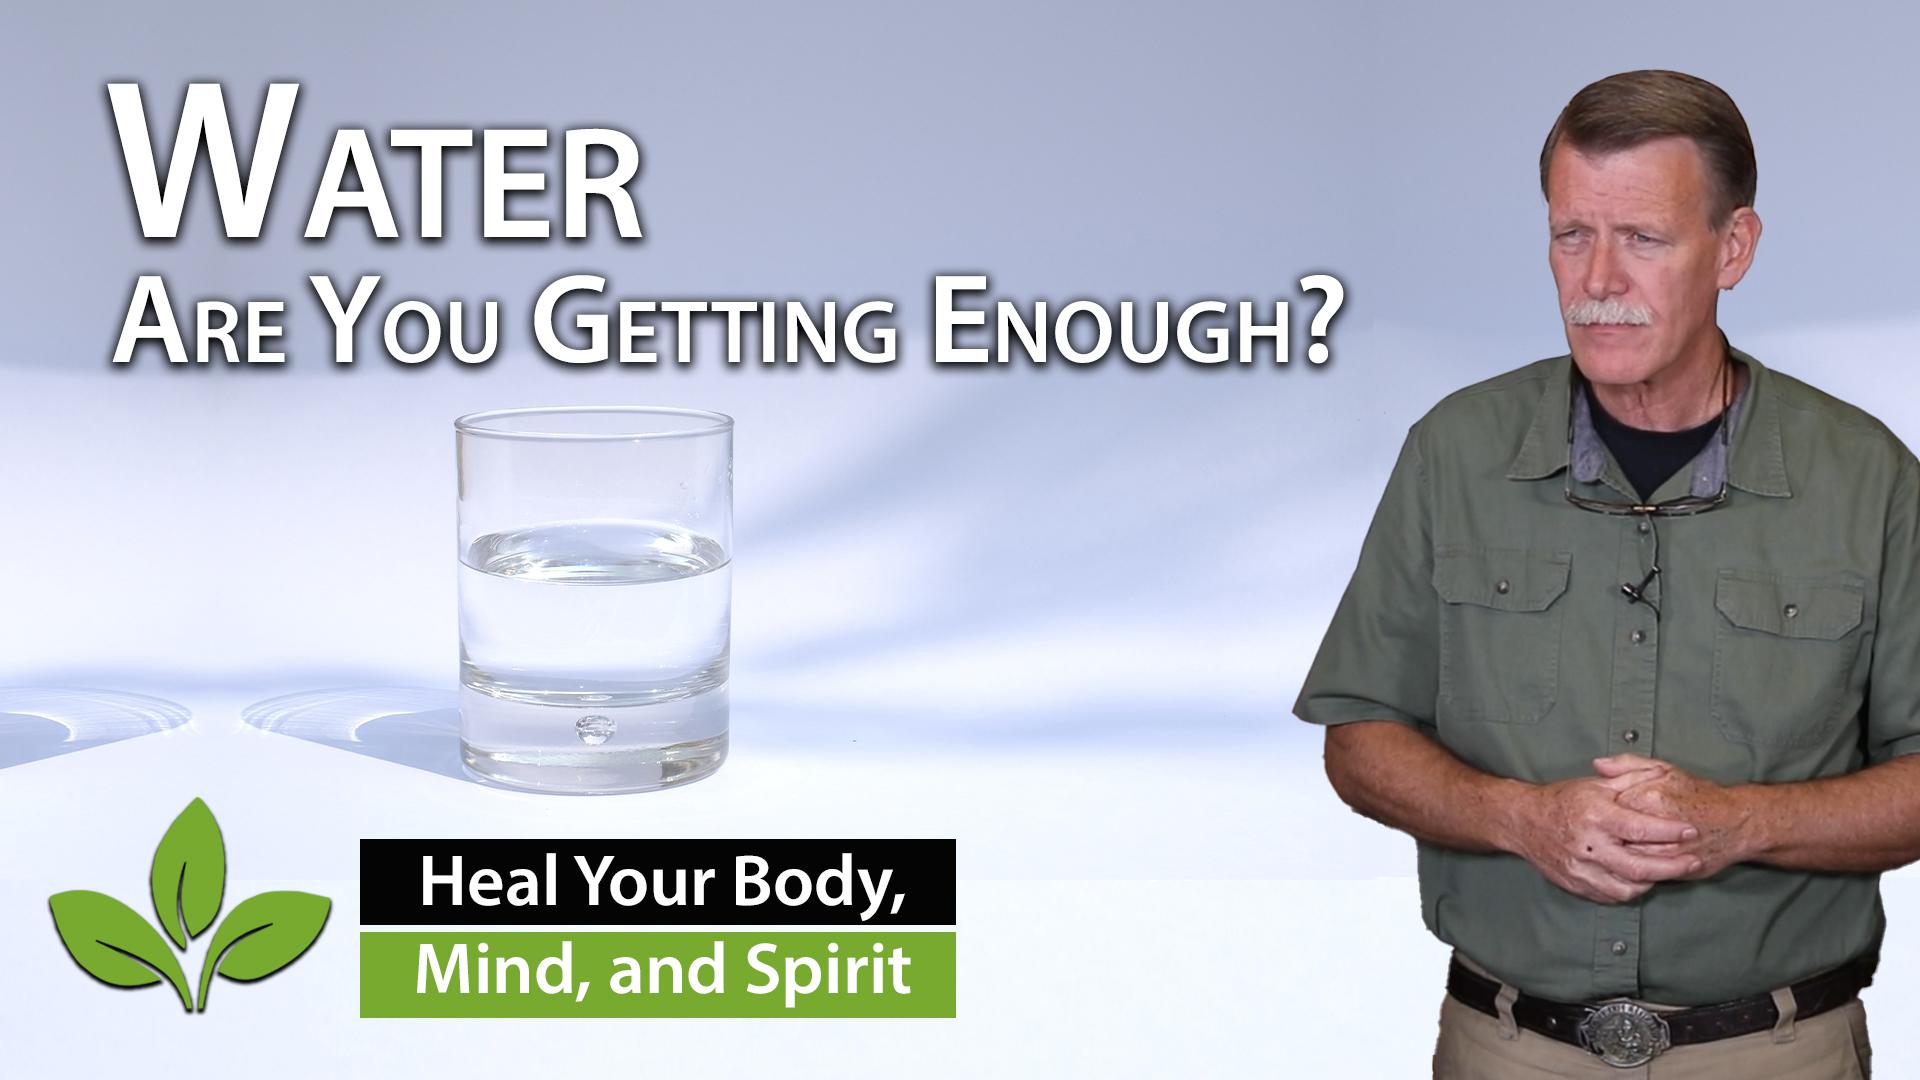 111Water: Are You Getting Enough?